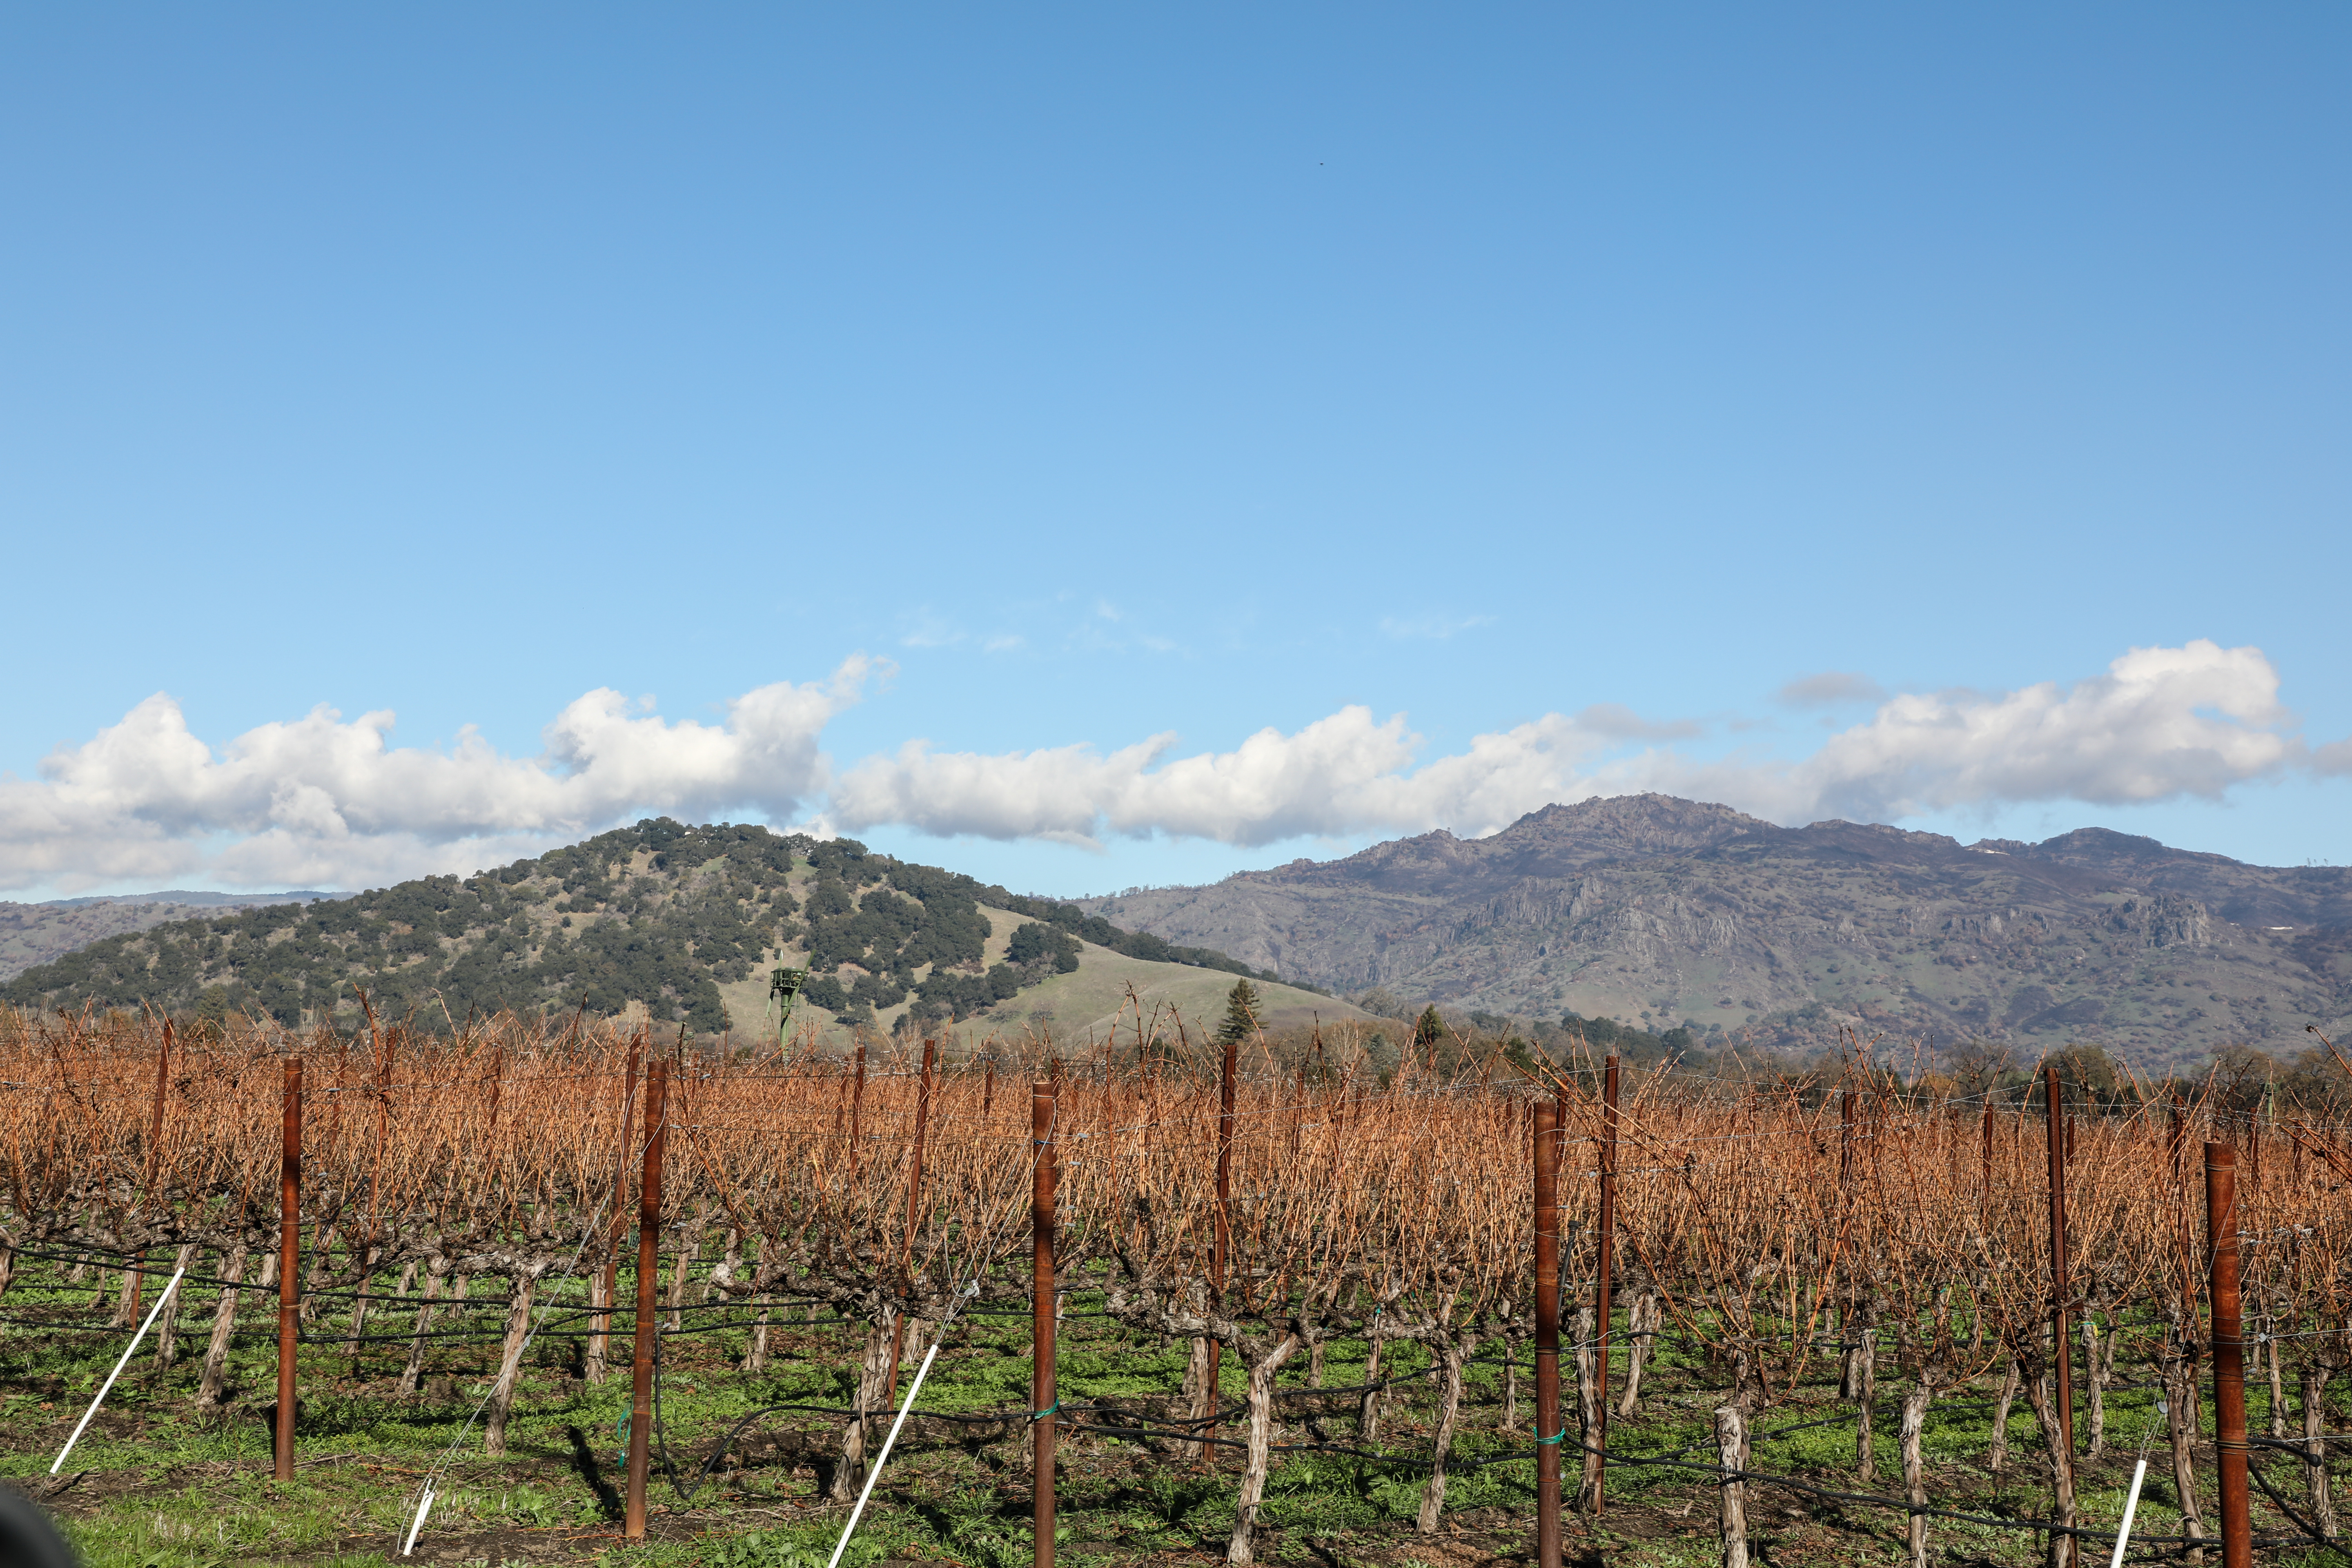 Dormant vineyards in the Coombsville AVA of Napa Valley's winegrowing region